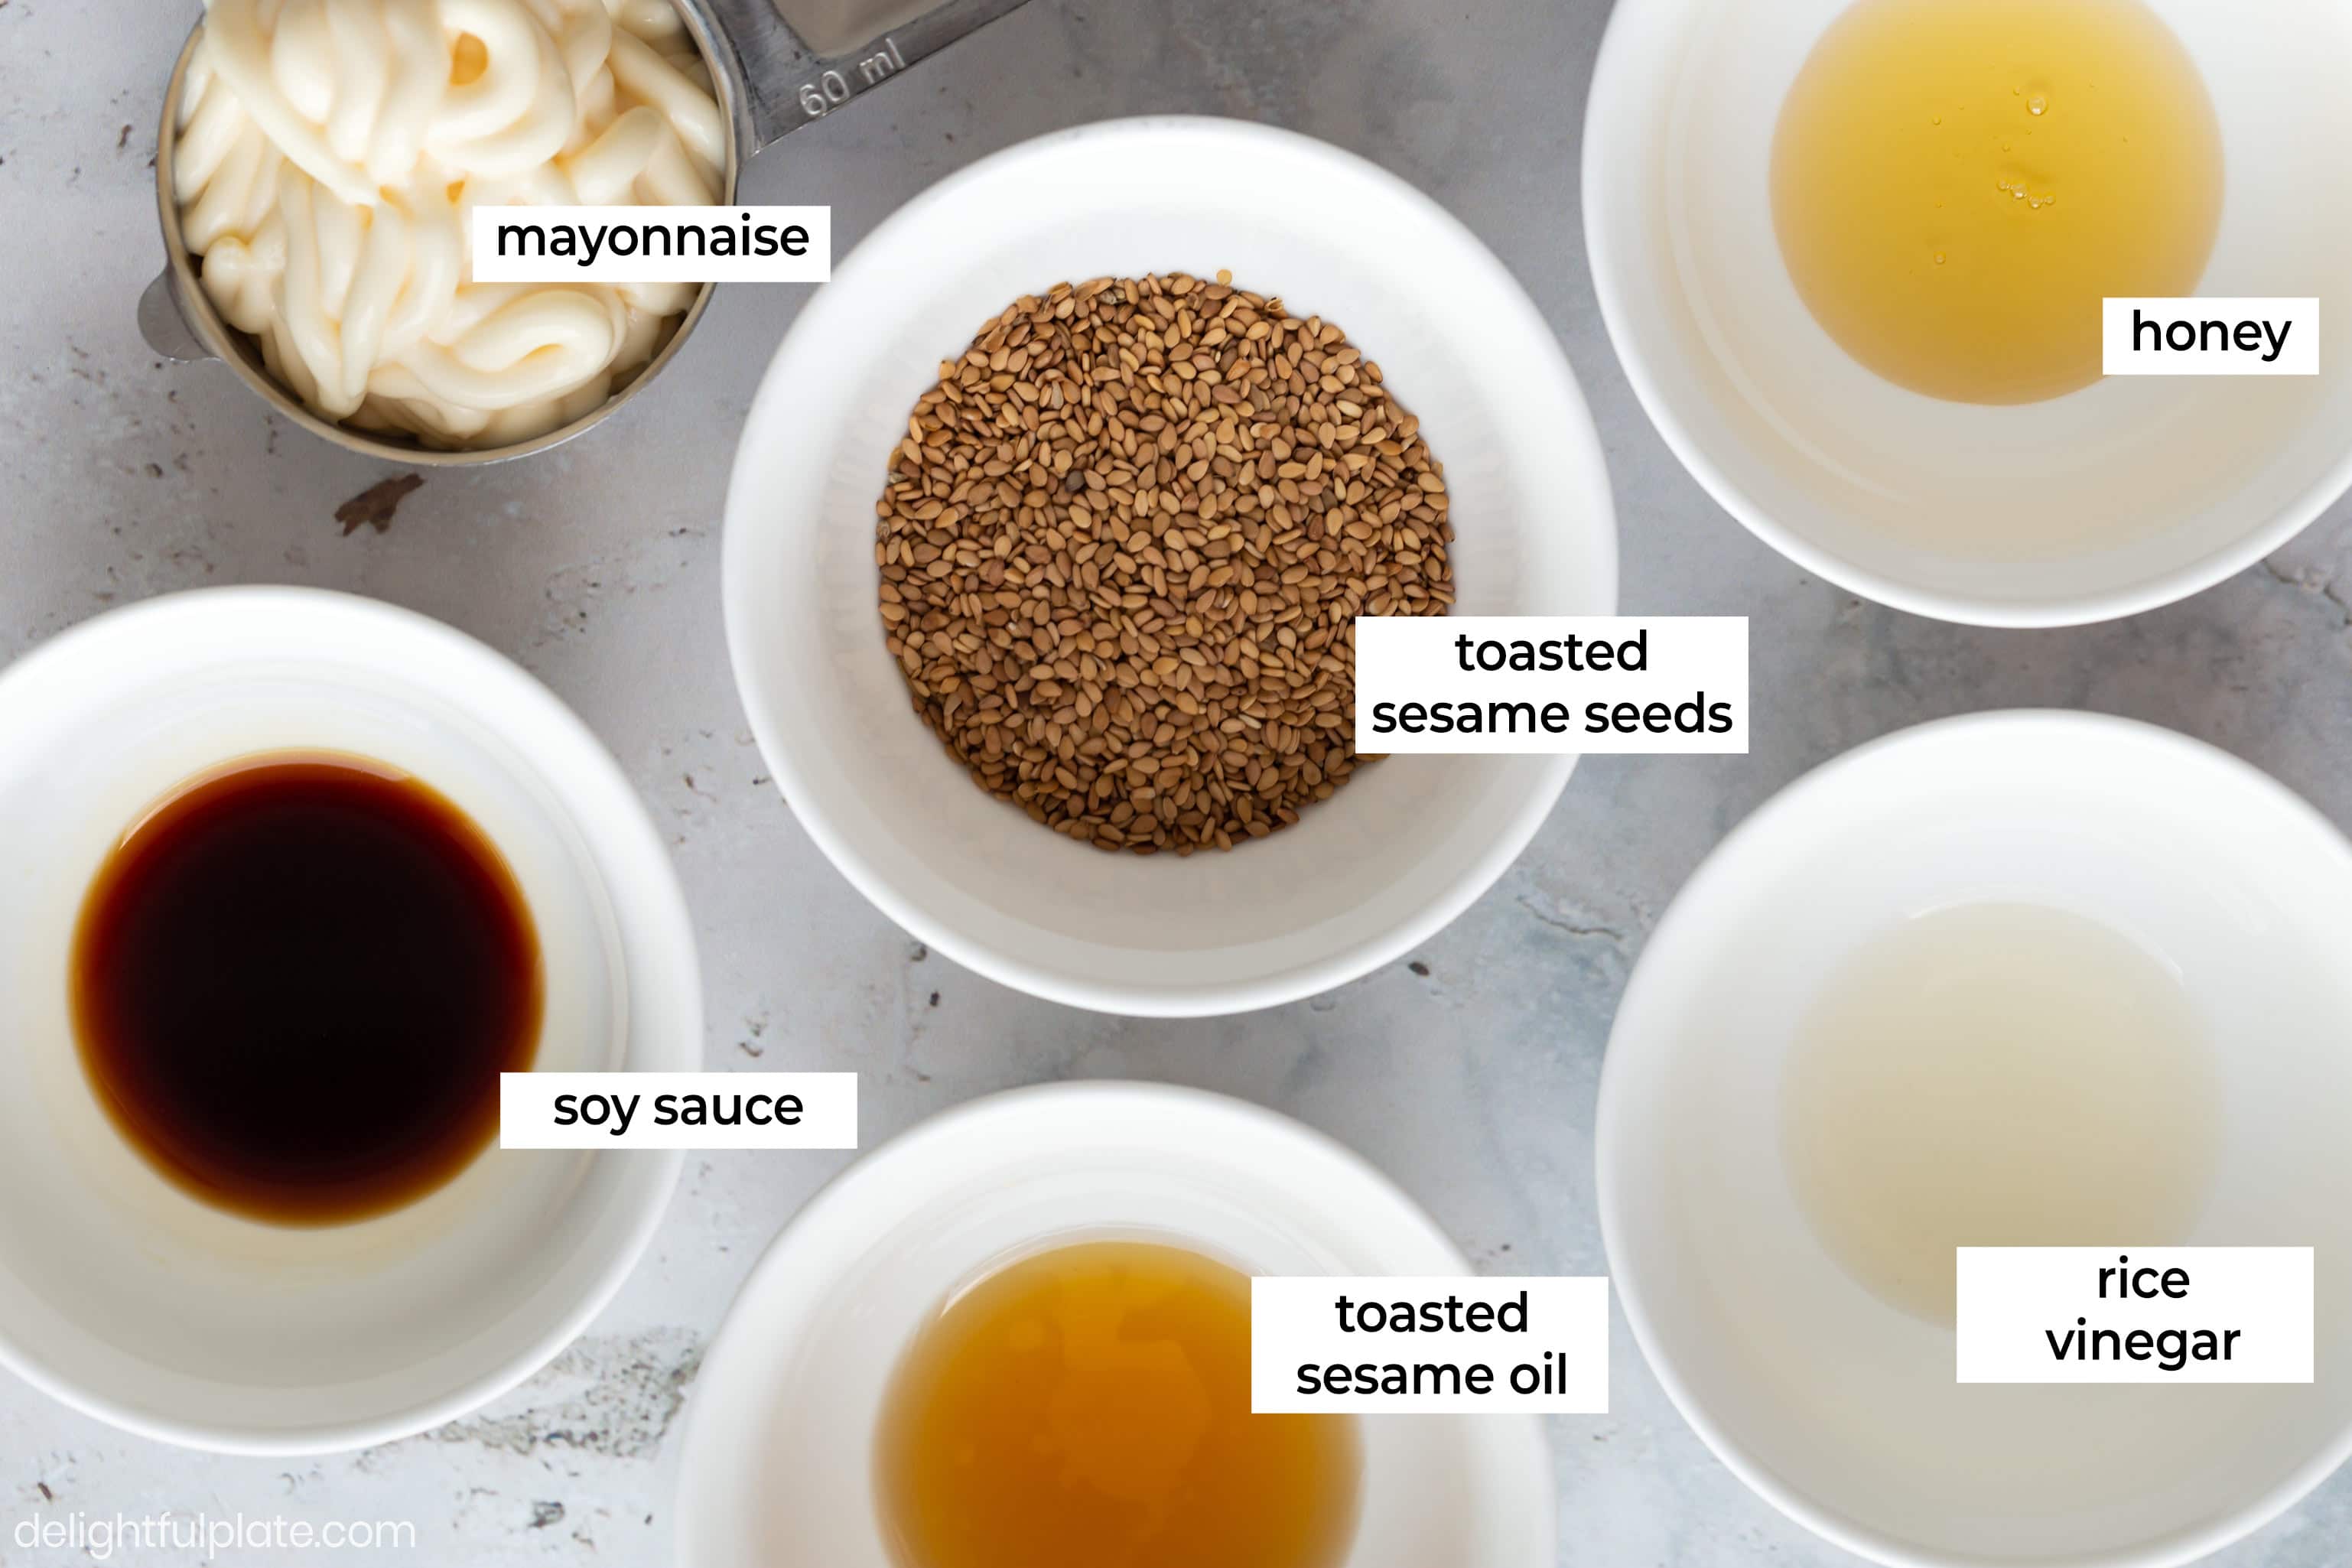 small bowls with ingredients for sesame dressing: mayonnaise, sesame seeds, honey, soy sauce, sesame oil and rice vinegar